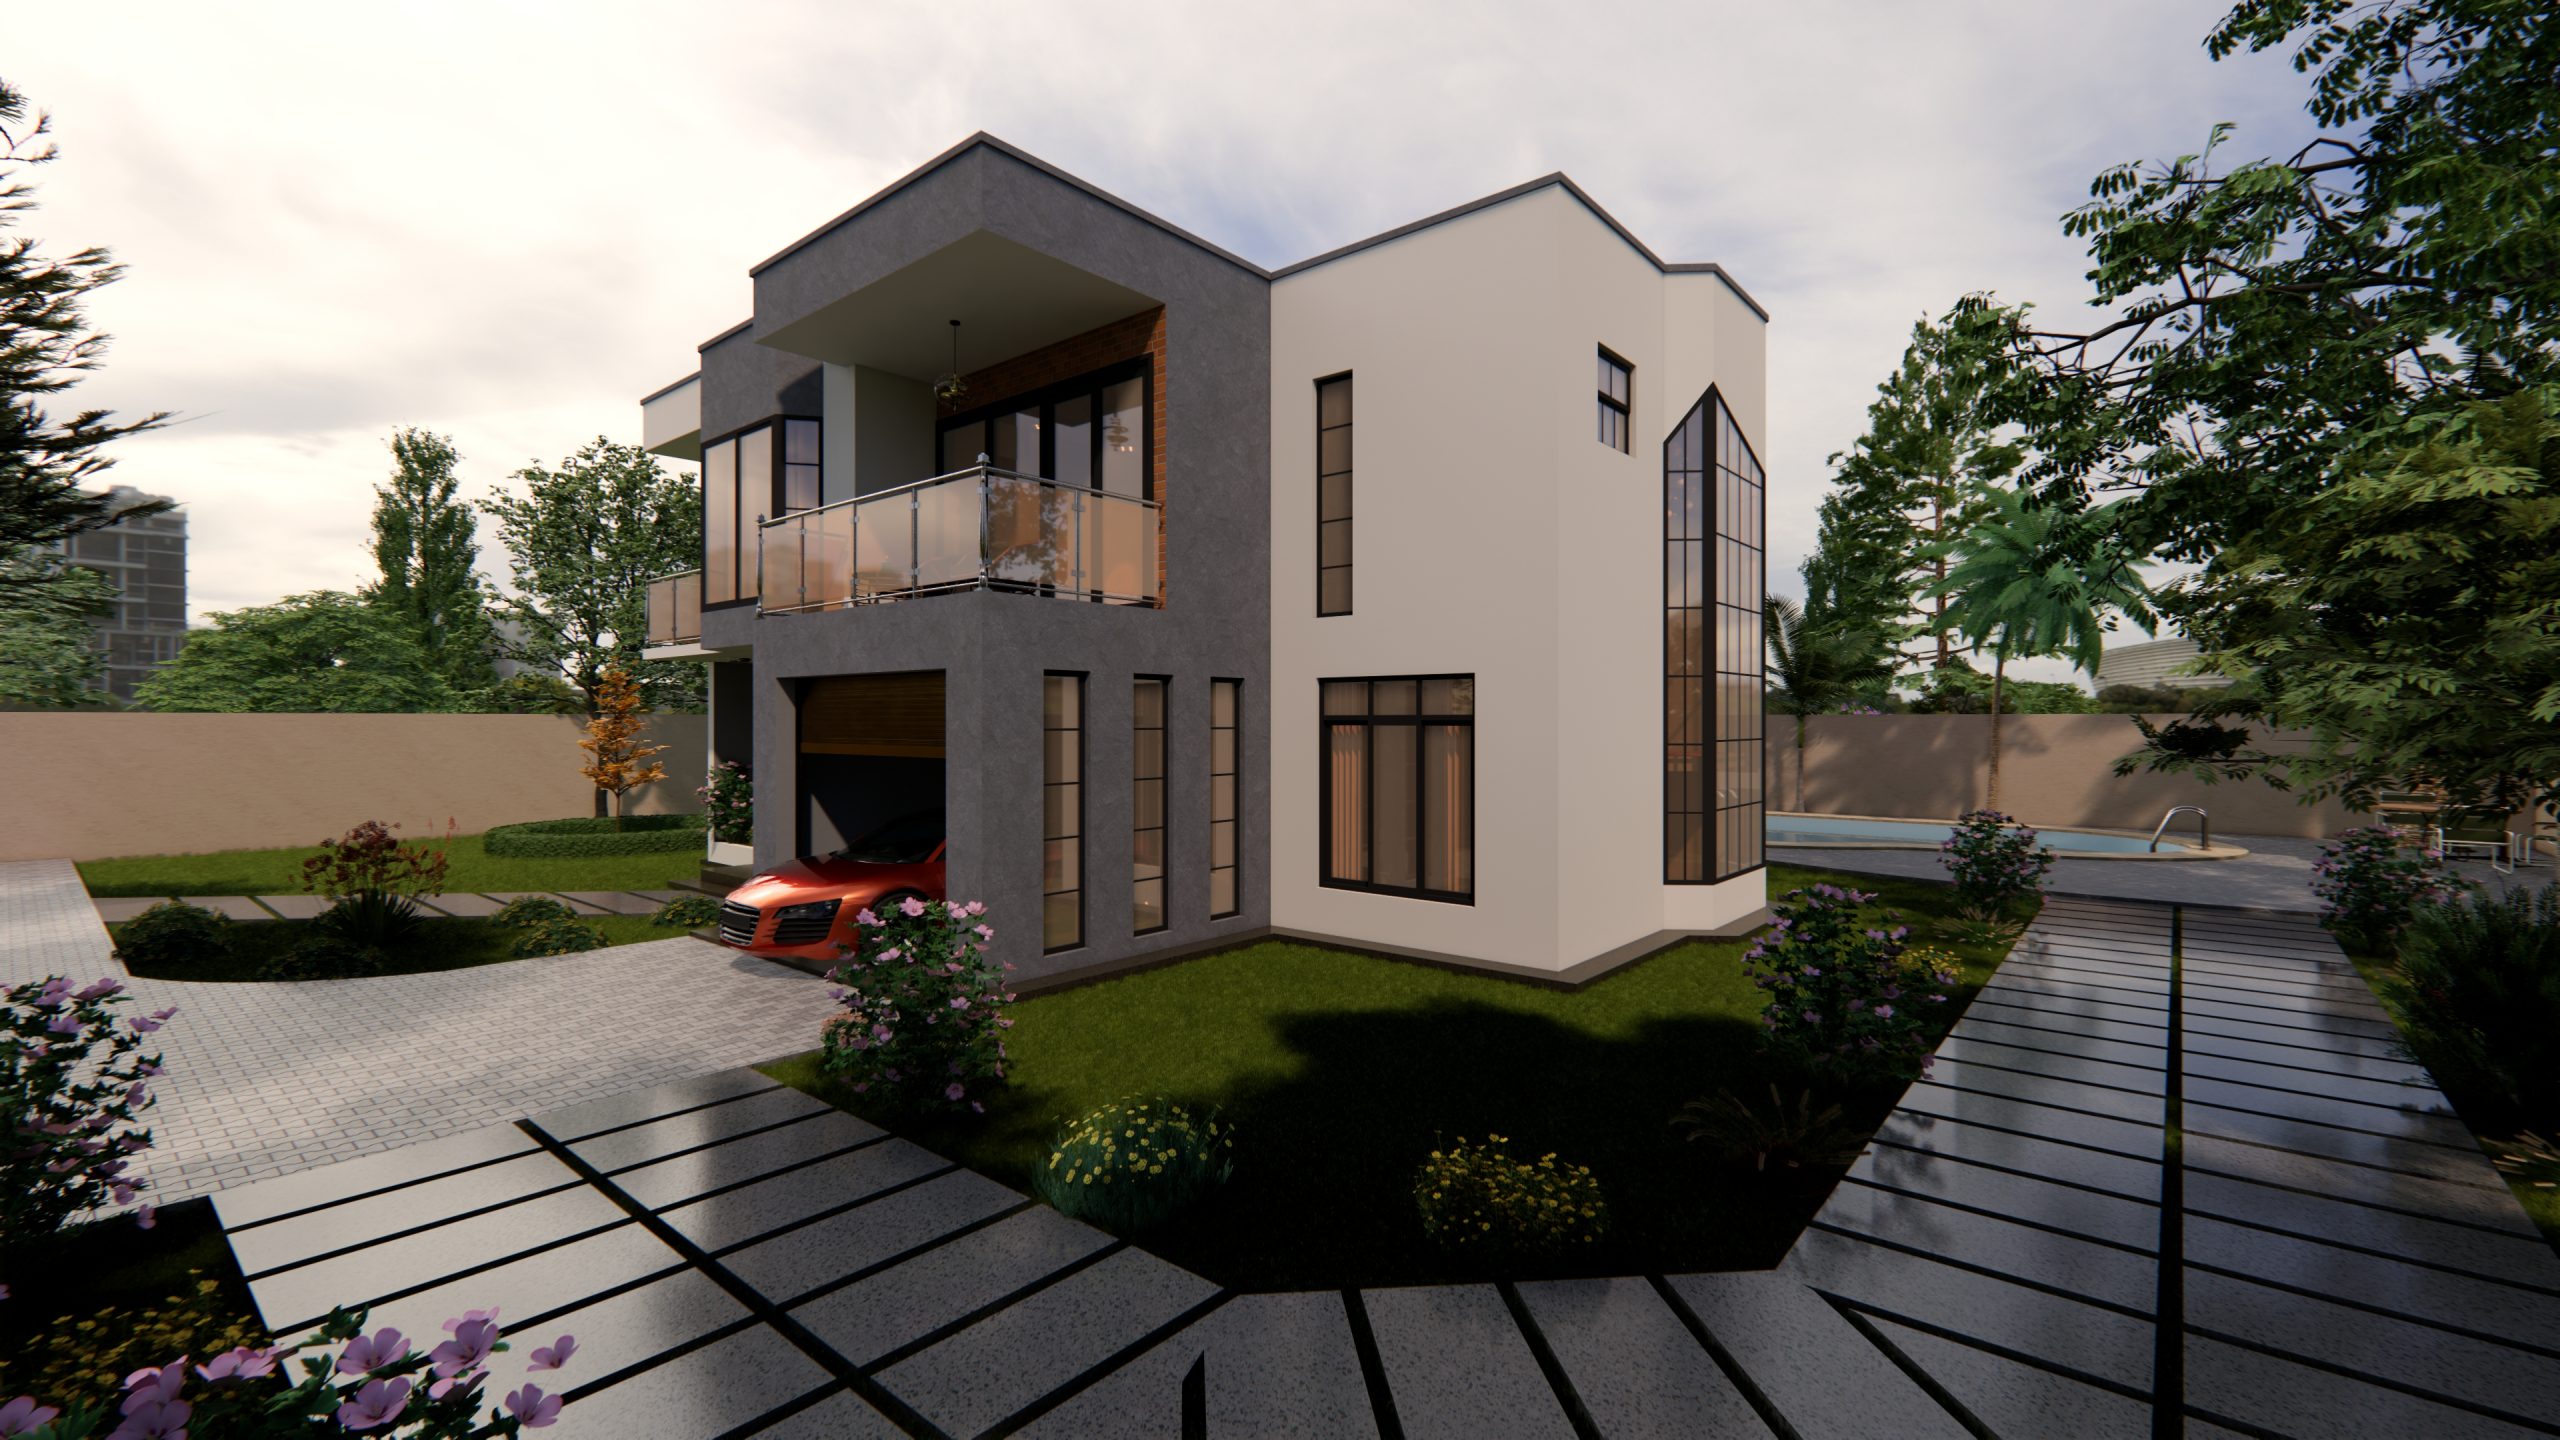 Five Bedroom Mansion House Plan with Flat Roof